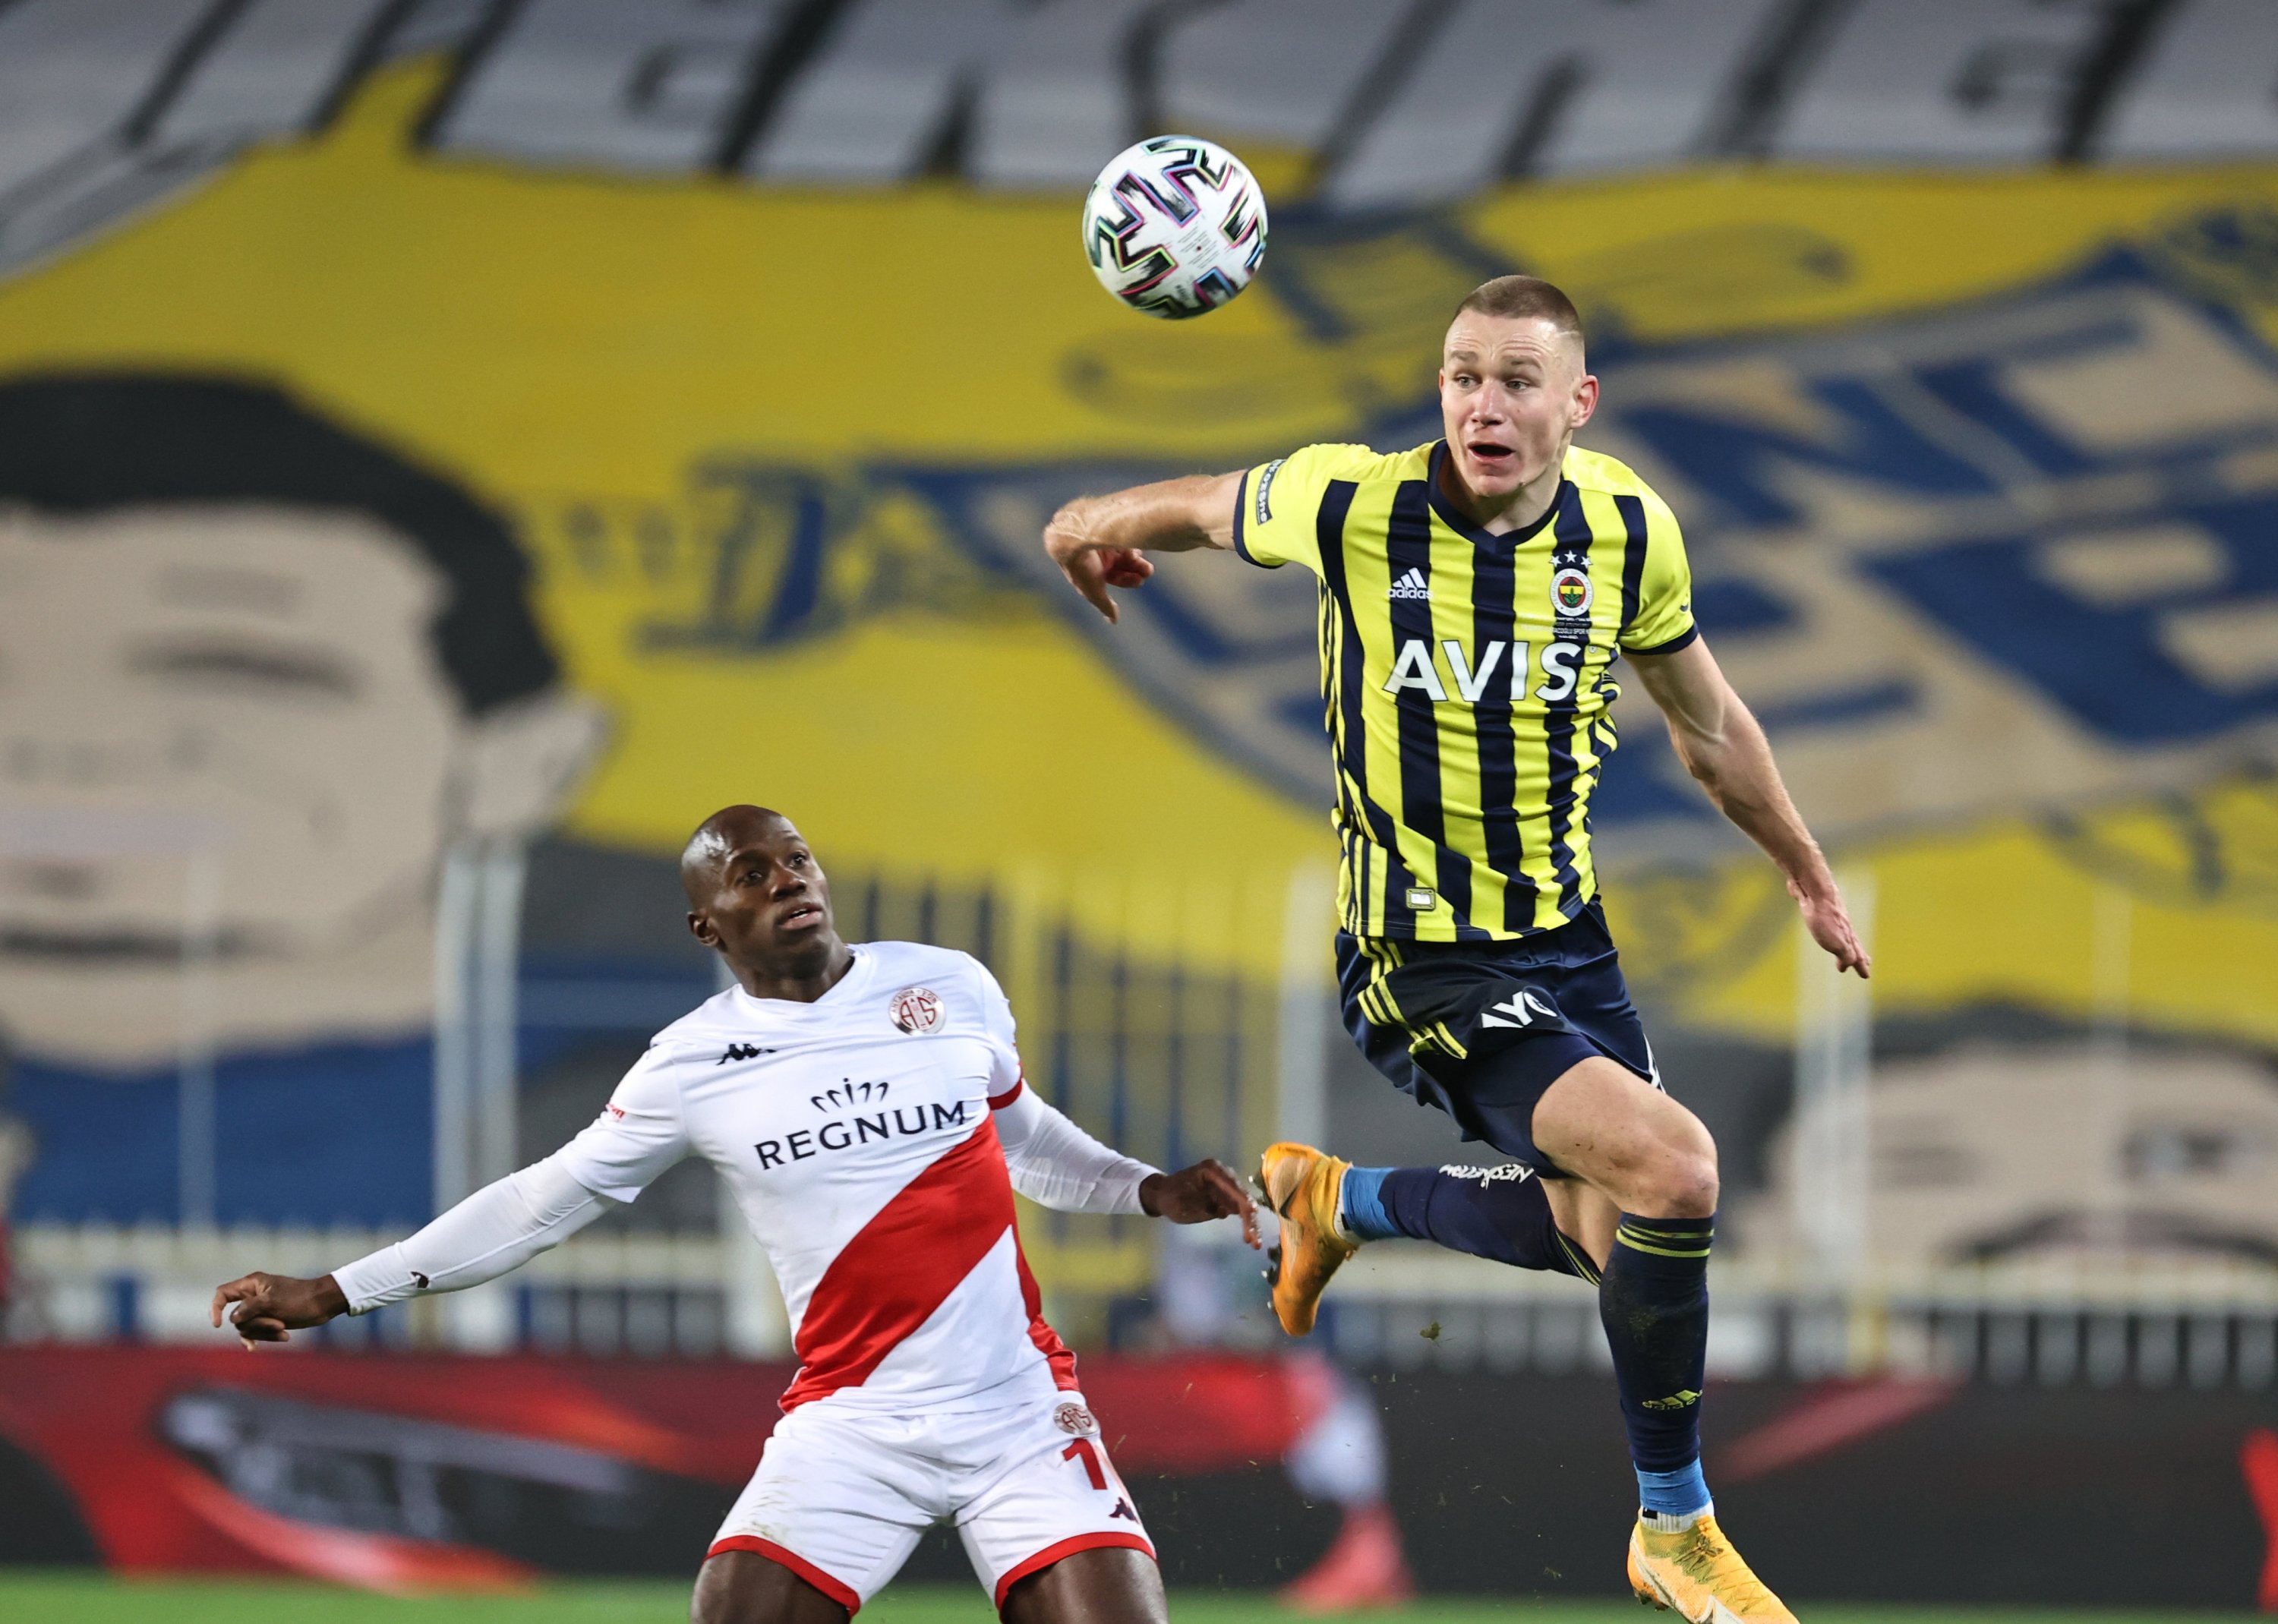 Fenerbahçe defender Szalai set to join Chelsea, Hungary coach claims |  Daily Sabah